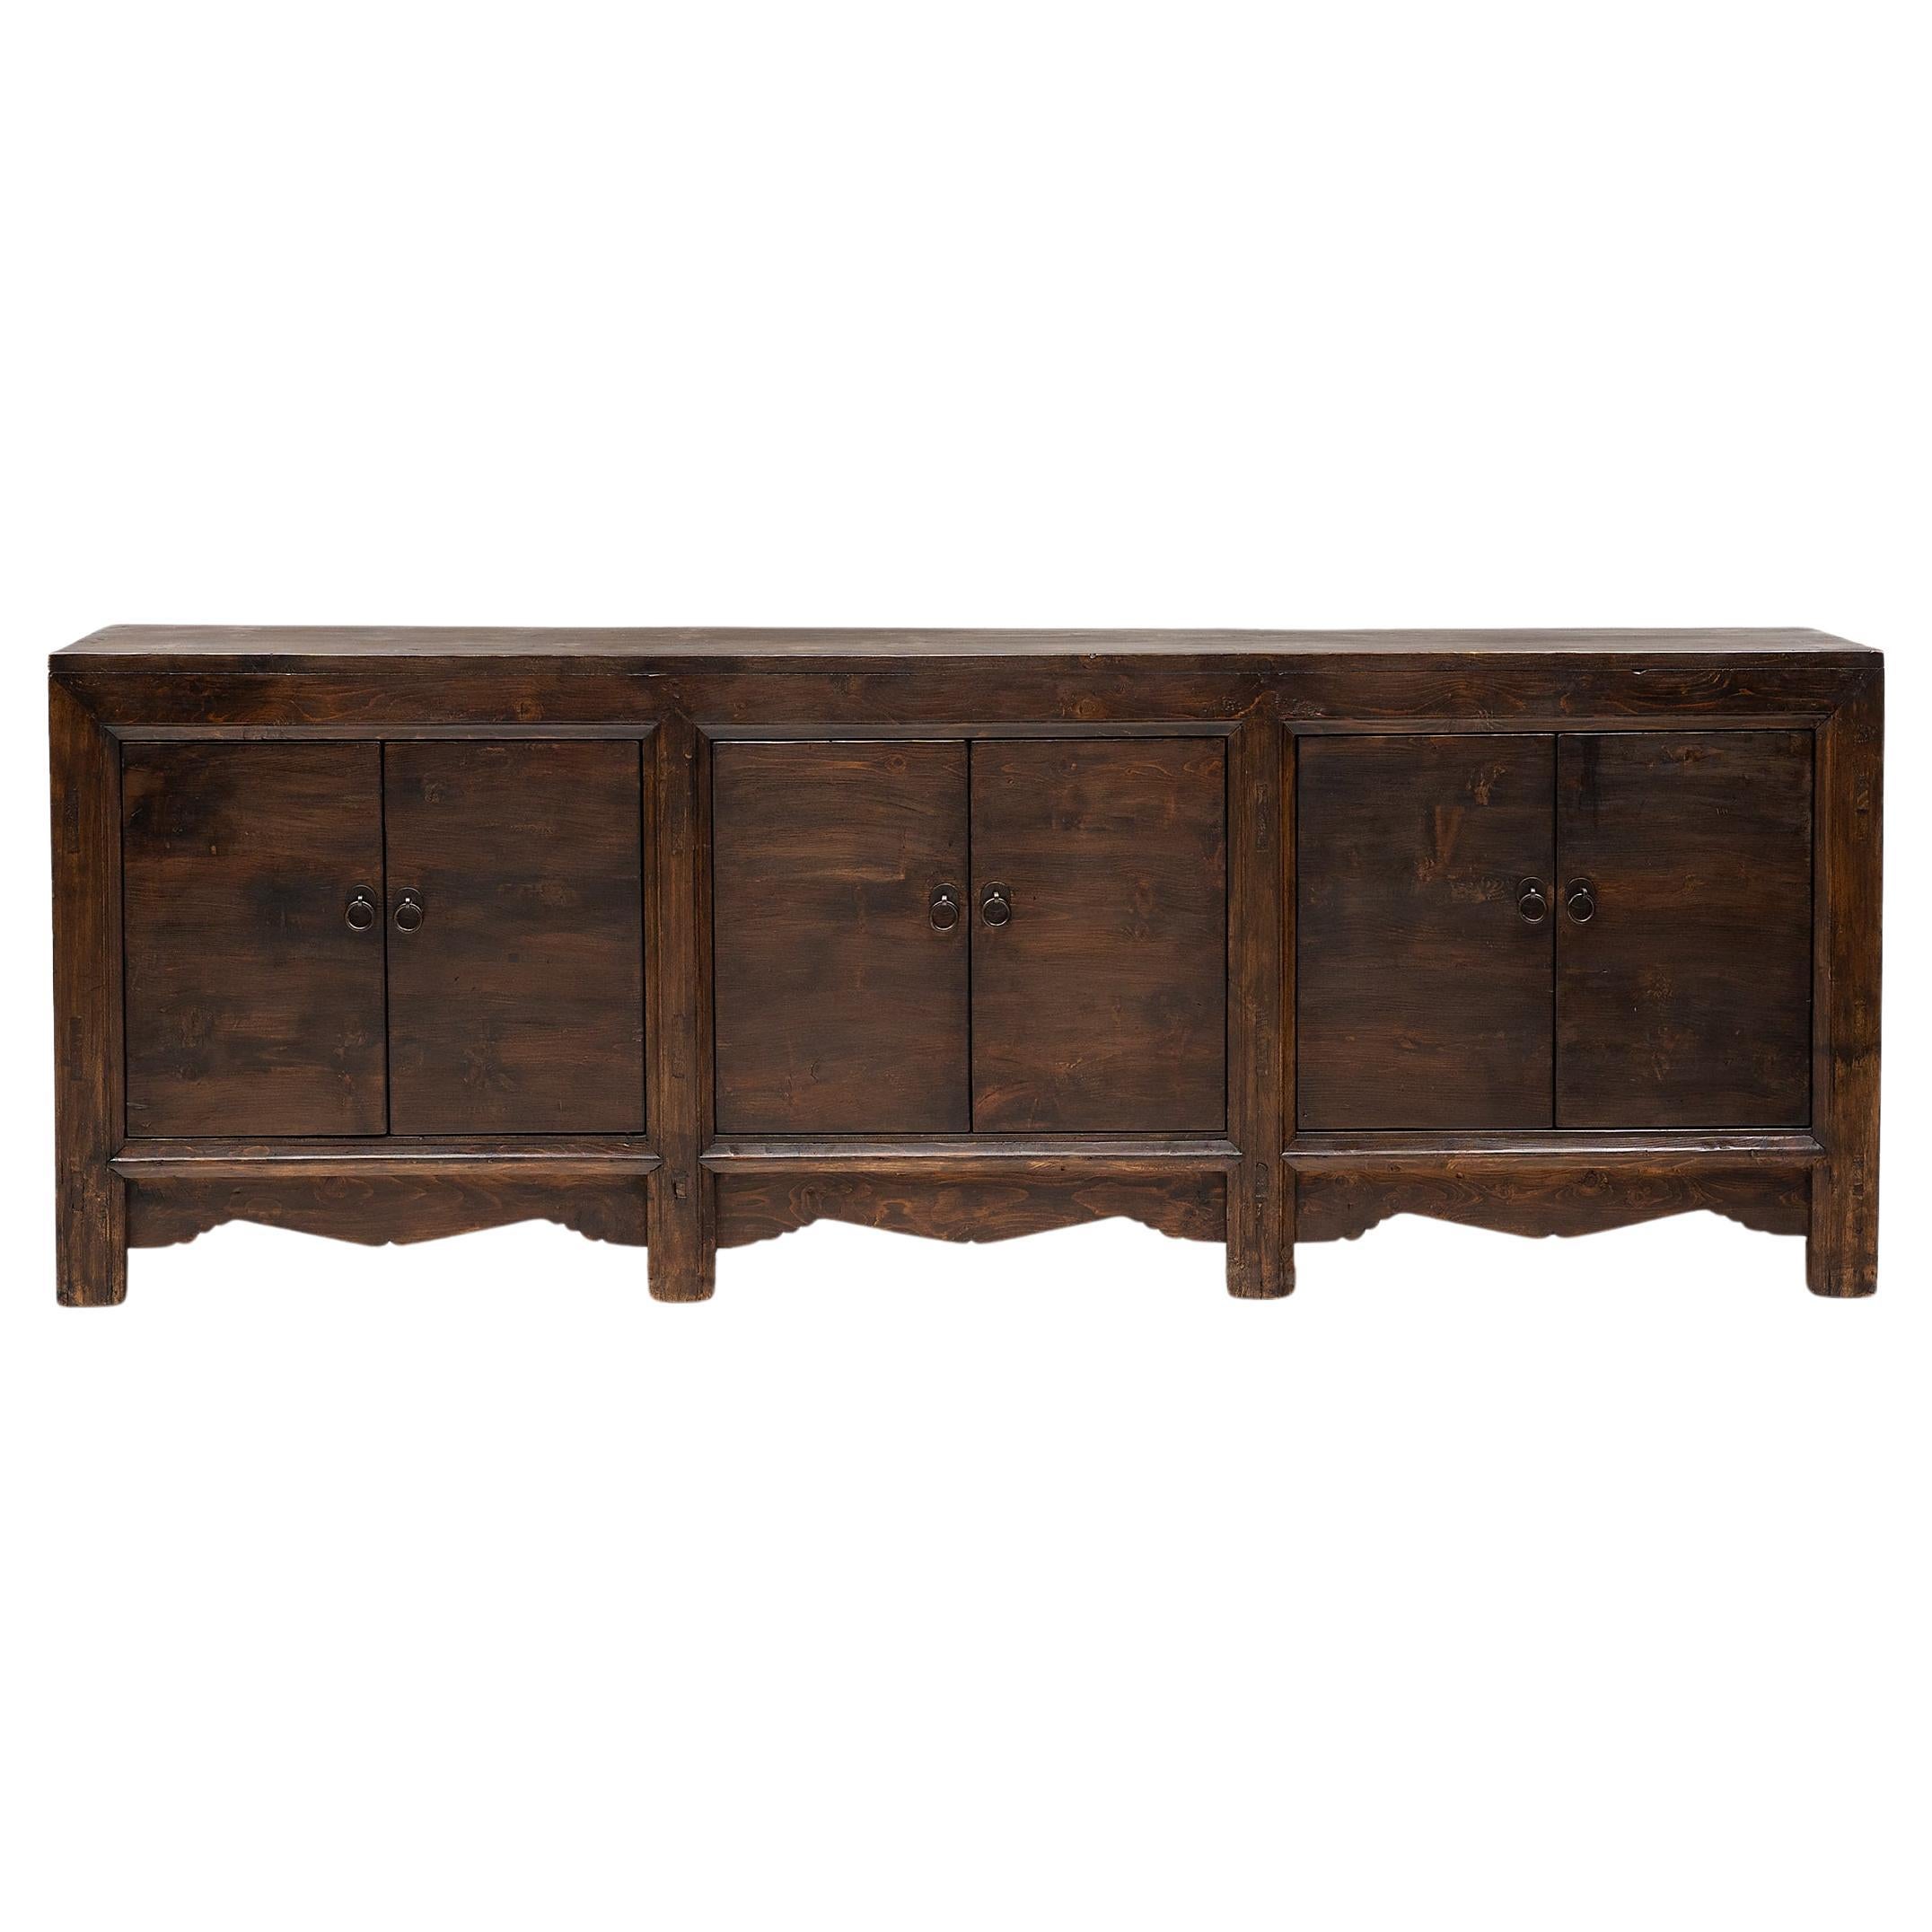 Chinese Pasture Sideboard, c. 1900 For Sale